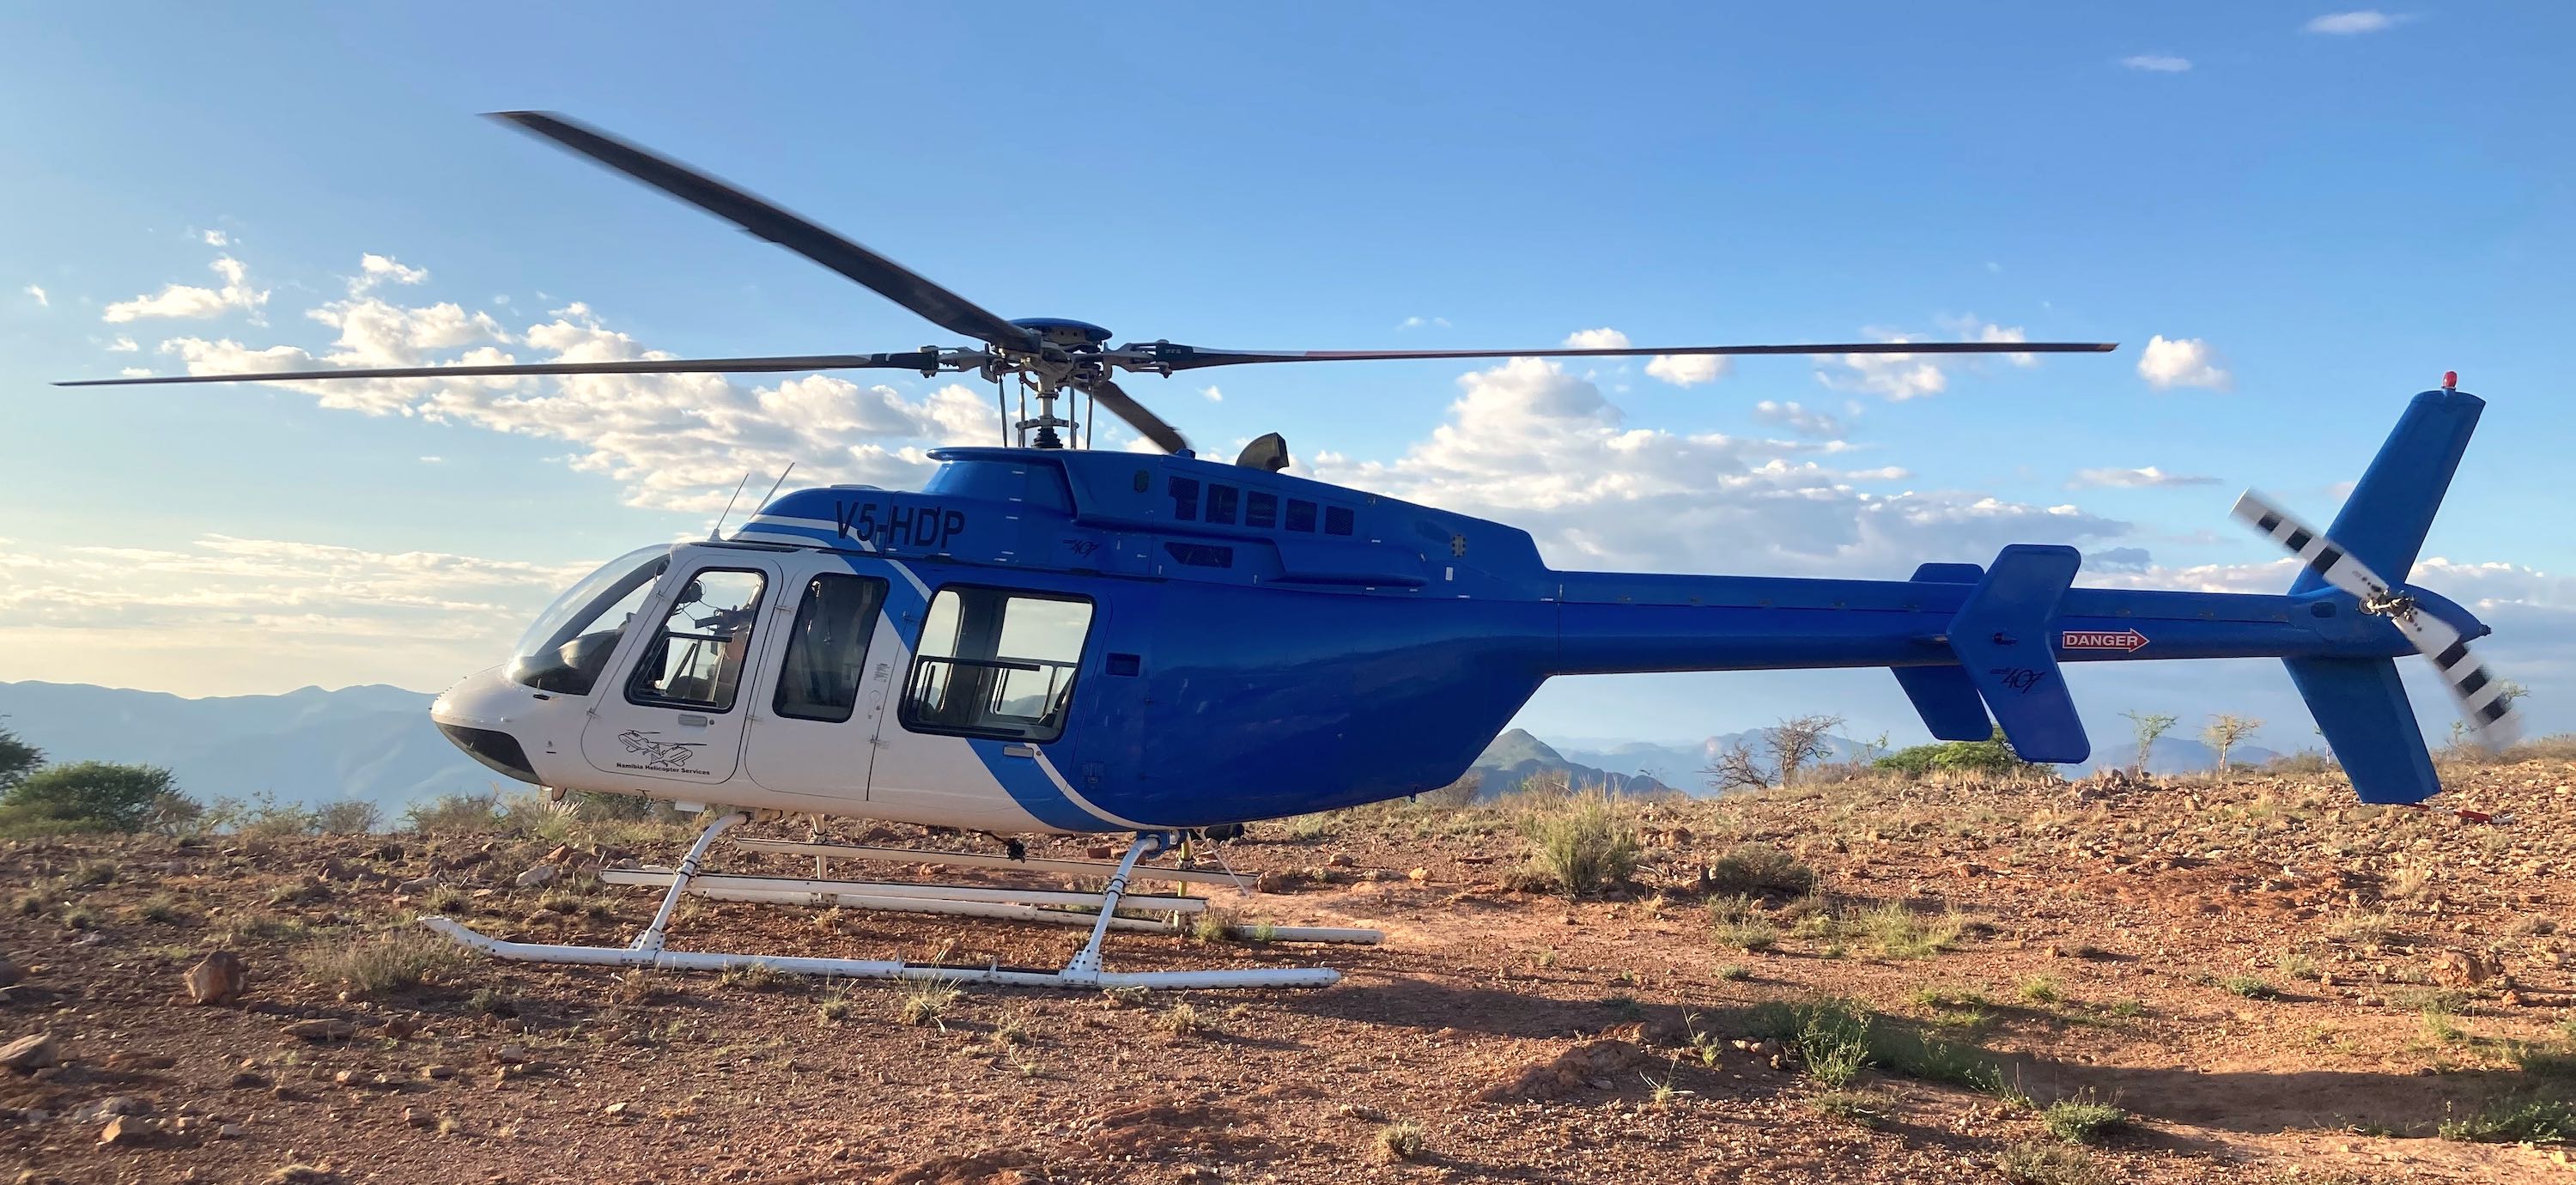 A blue and white helicopter prepares to take off from a high plateau.